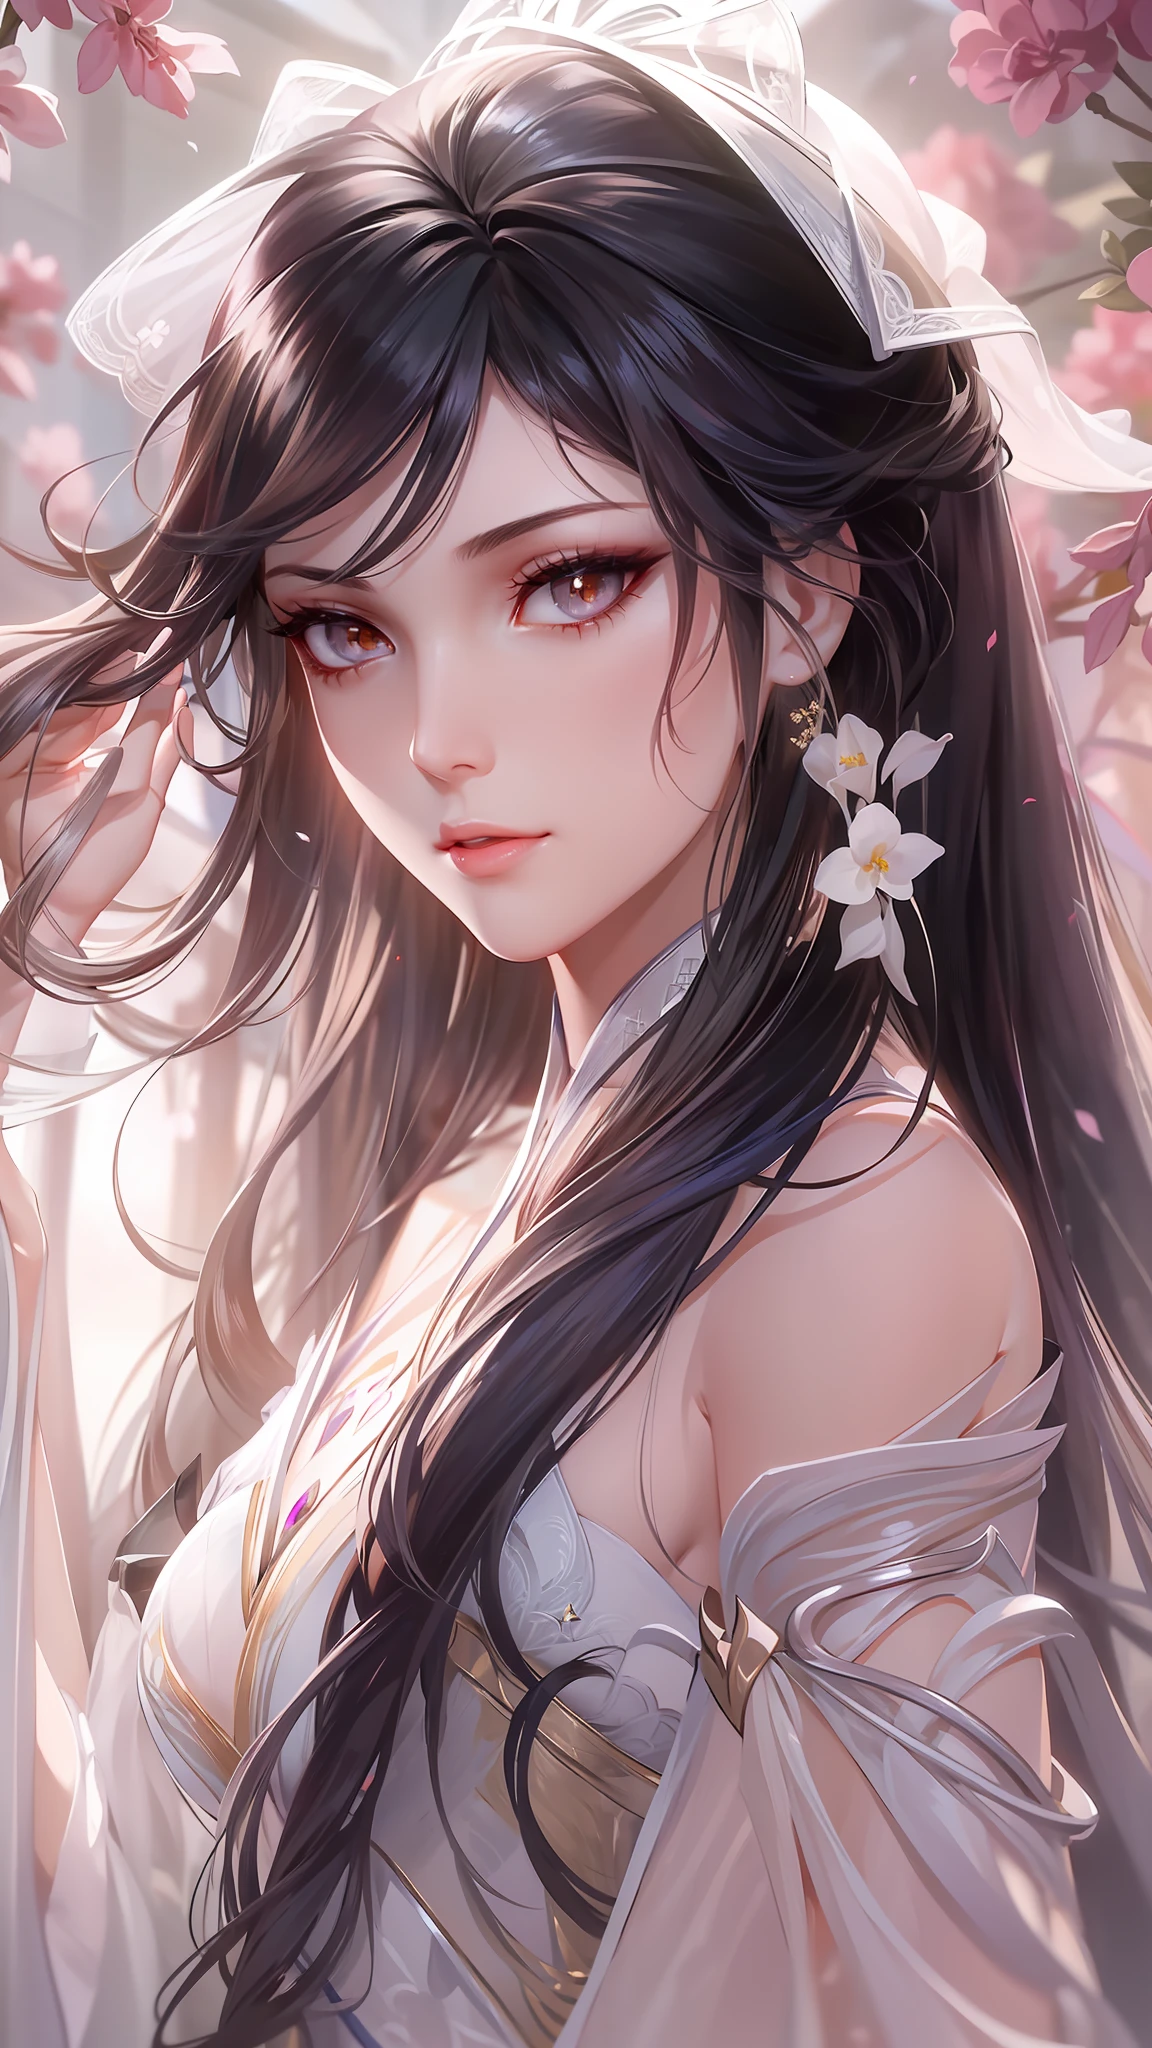 An elegant woman with straight black hair wears a gorgeous long dress with light and elegant movements. (Girl), Lace, Ribbon, Hanfu, (Masterpiece, Side Light, Delicate and Pretty), Masterpiece, Realistic, Glowing Eyes, Sparkling Hair, Shiny Skin, Celime, Bare Shoulder, Delicate, Beautiful, Garden, Flowers, Fluttering Petals, Sideways, Conservatism